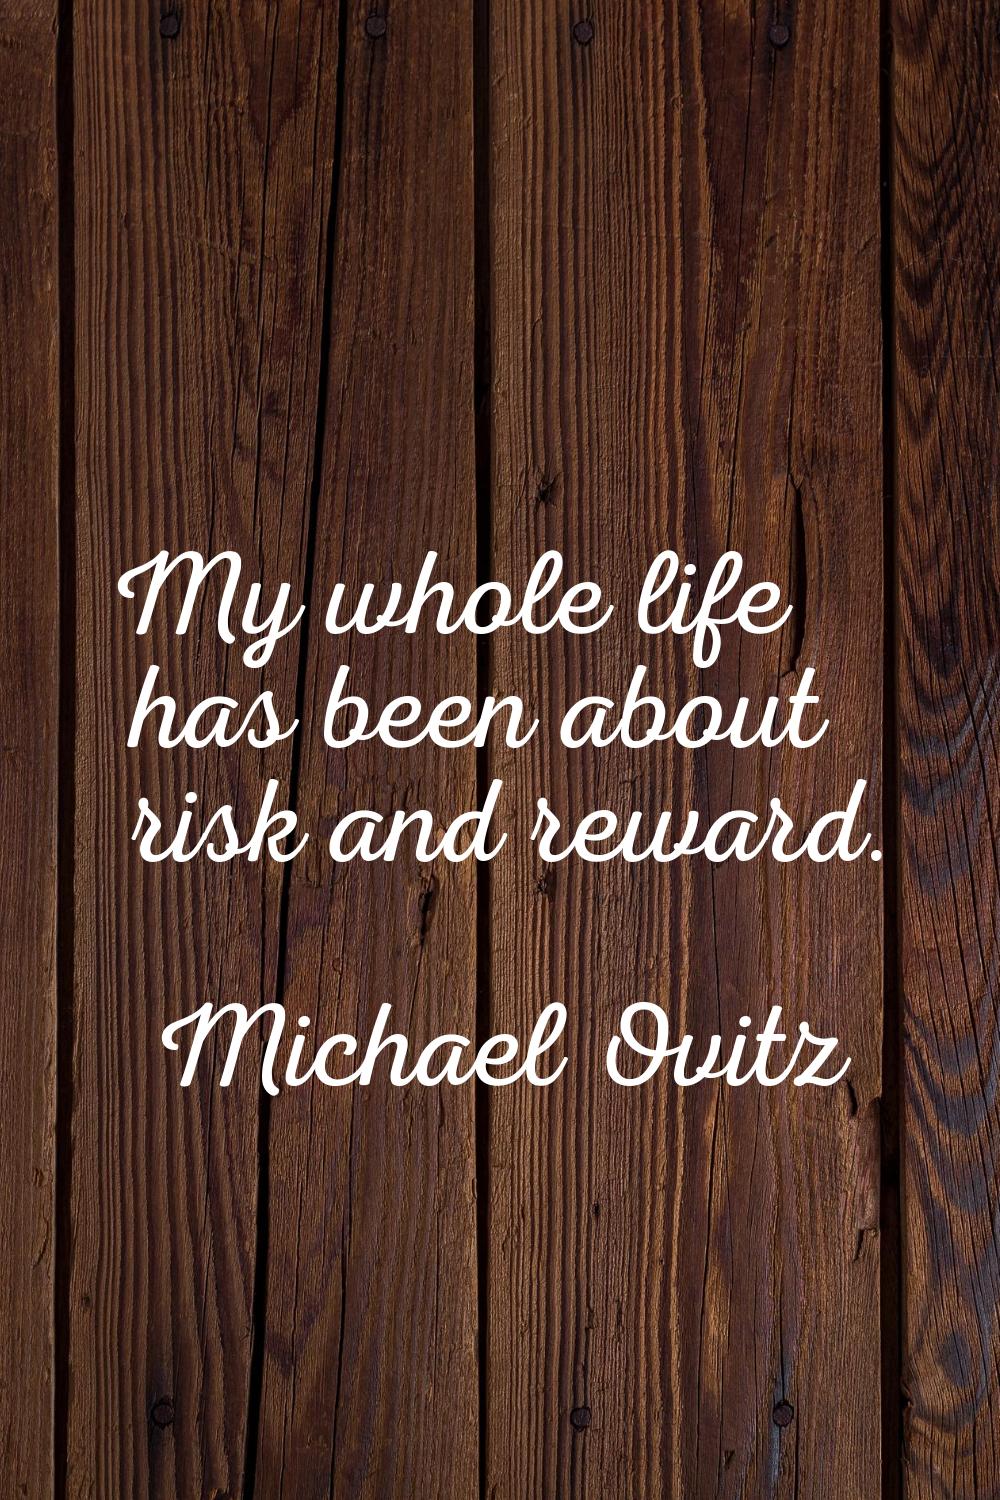 My whole life has been about risk and reward.